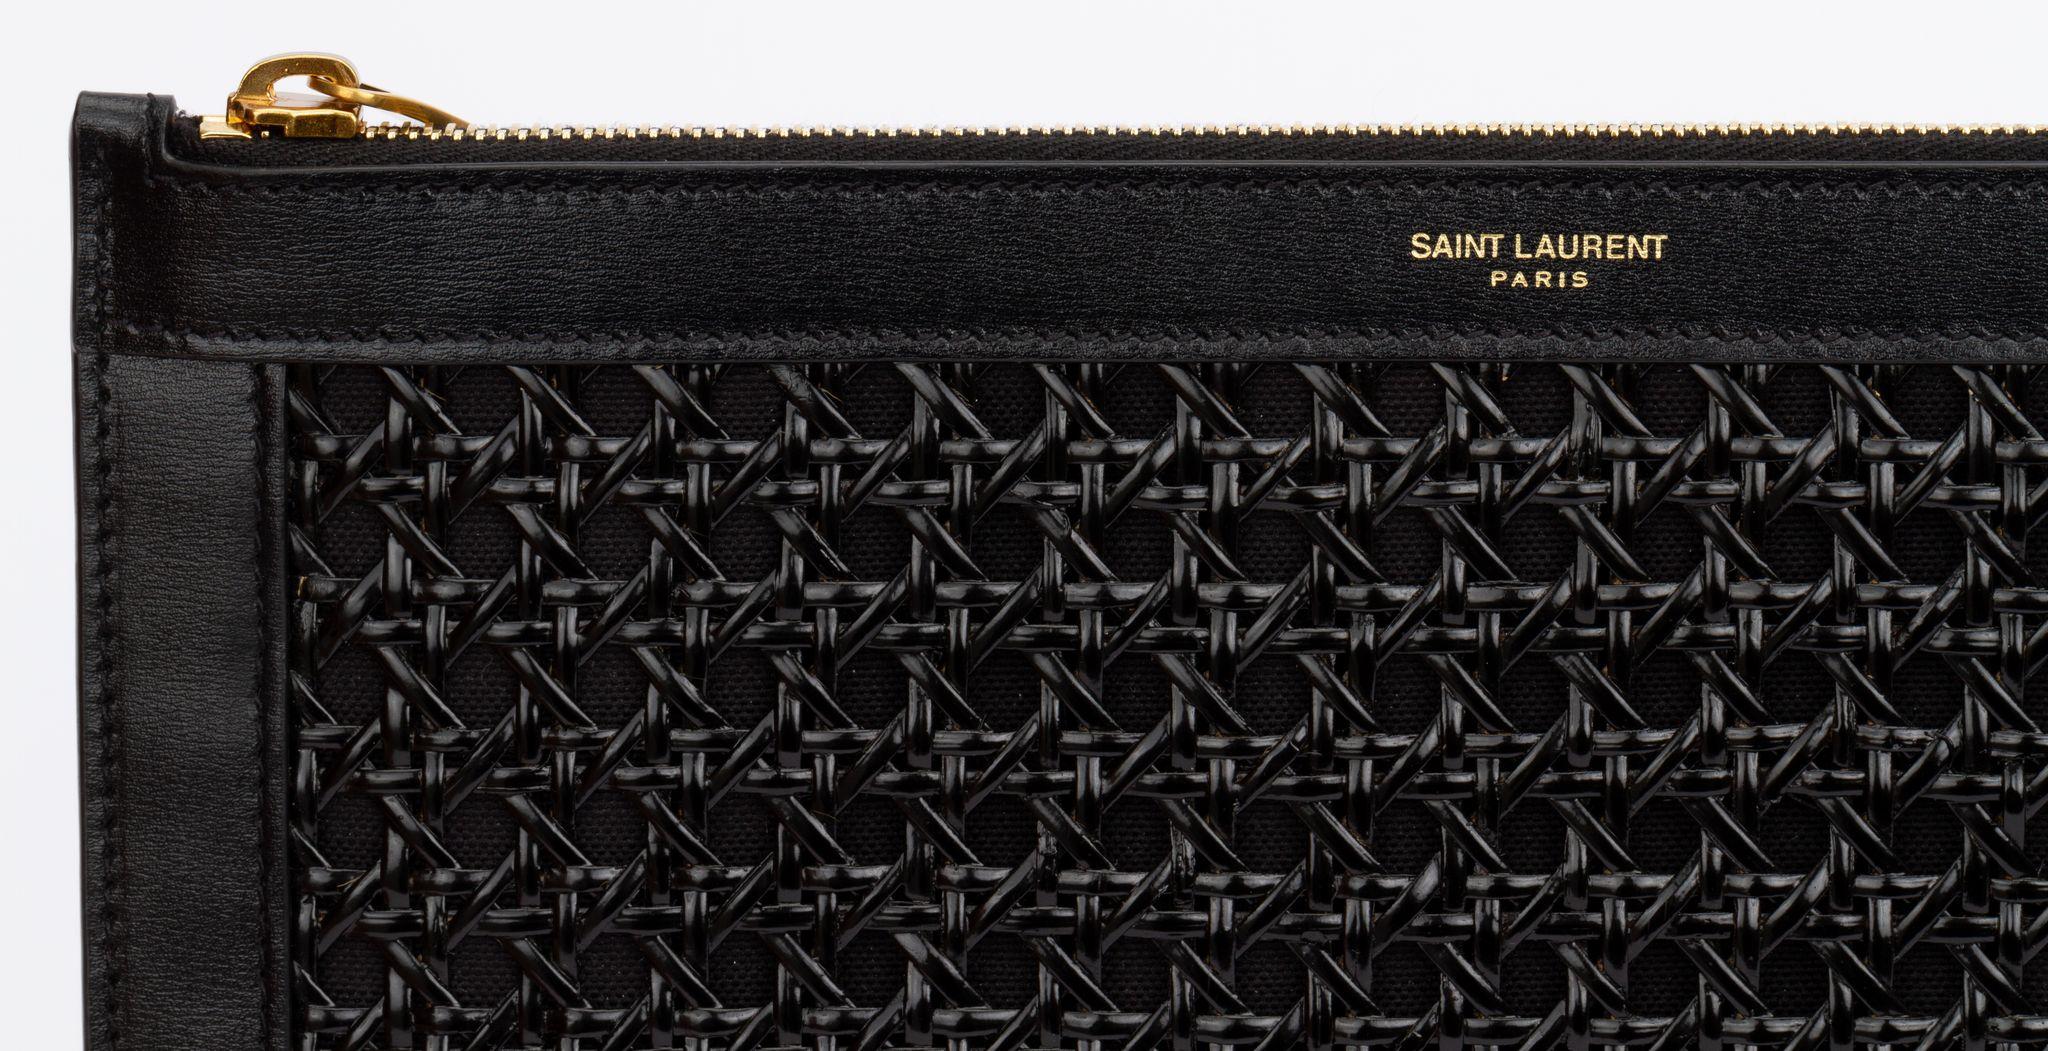 Yves Saint Laurent Wicker Clutch Black In Excellent Condition For Sale In West Hollywood, CA